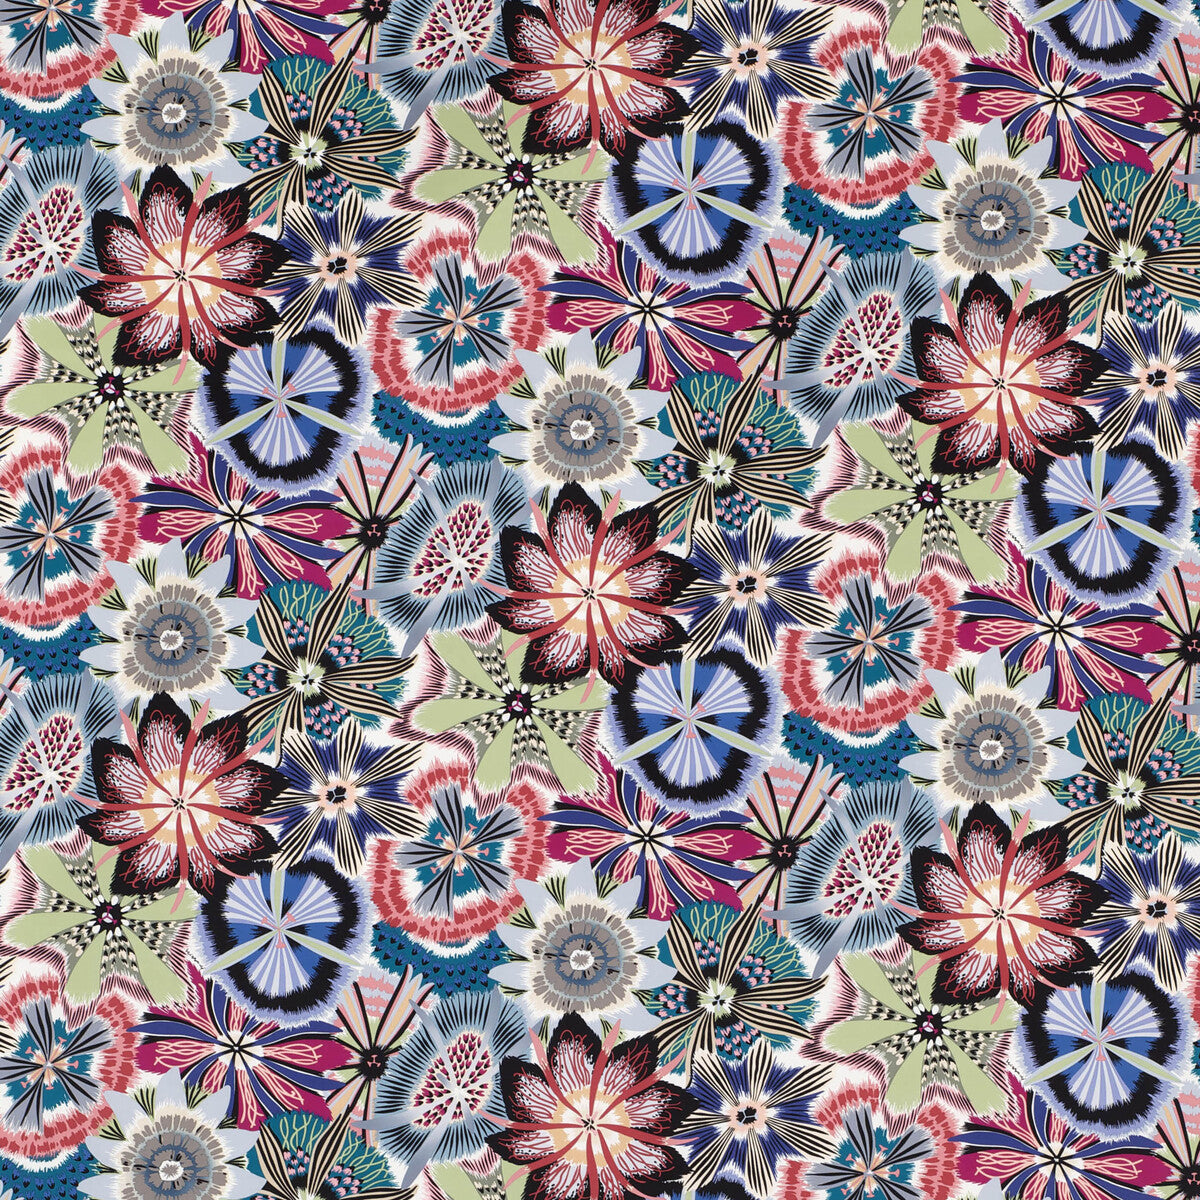 Passiflora fabric in t50 color - pattern 36181.517.0 - by Kravet Couture in the Missoni Home collection